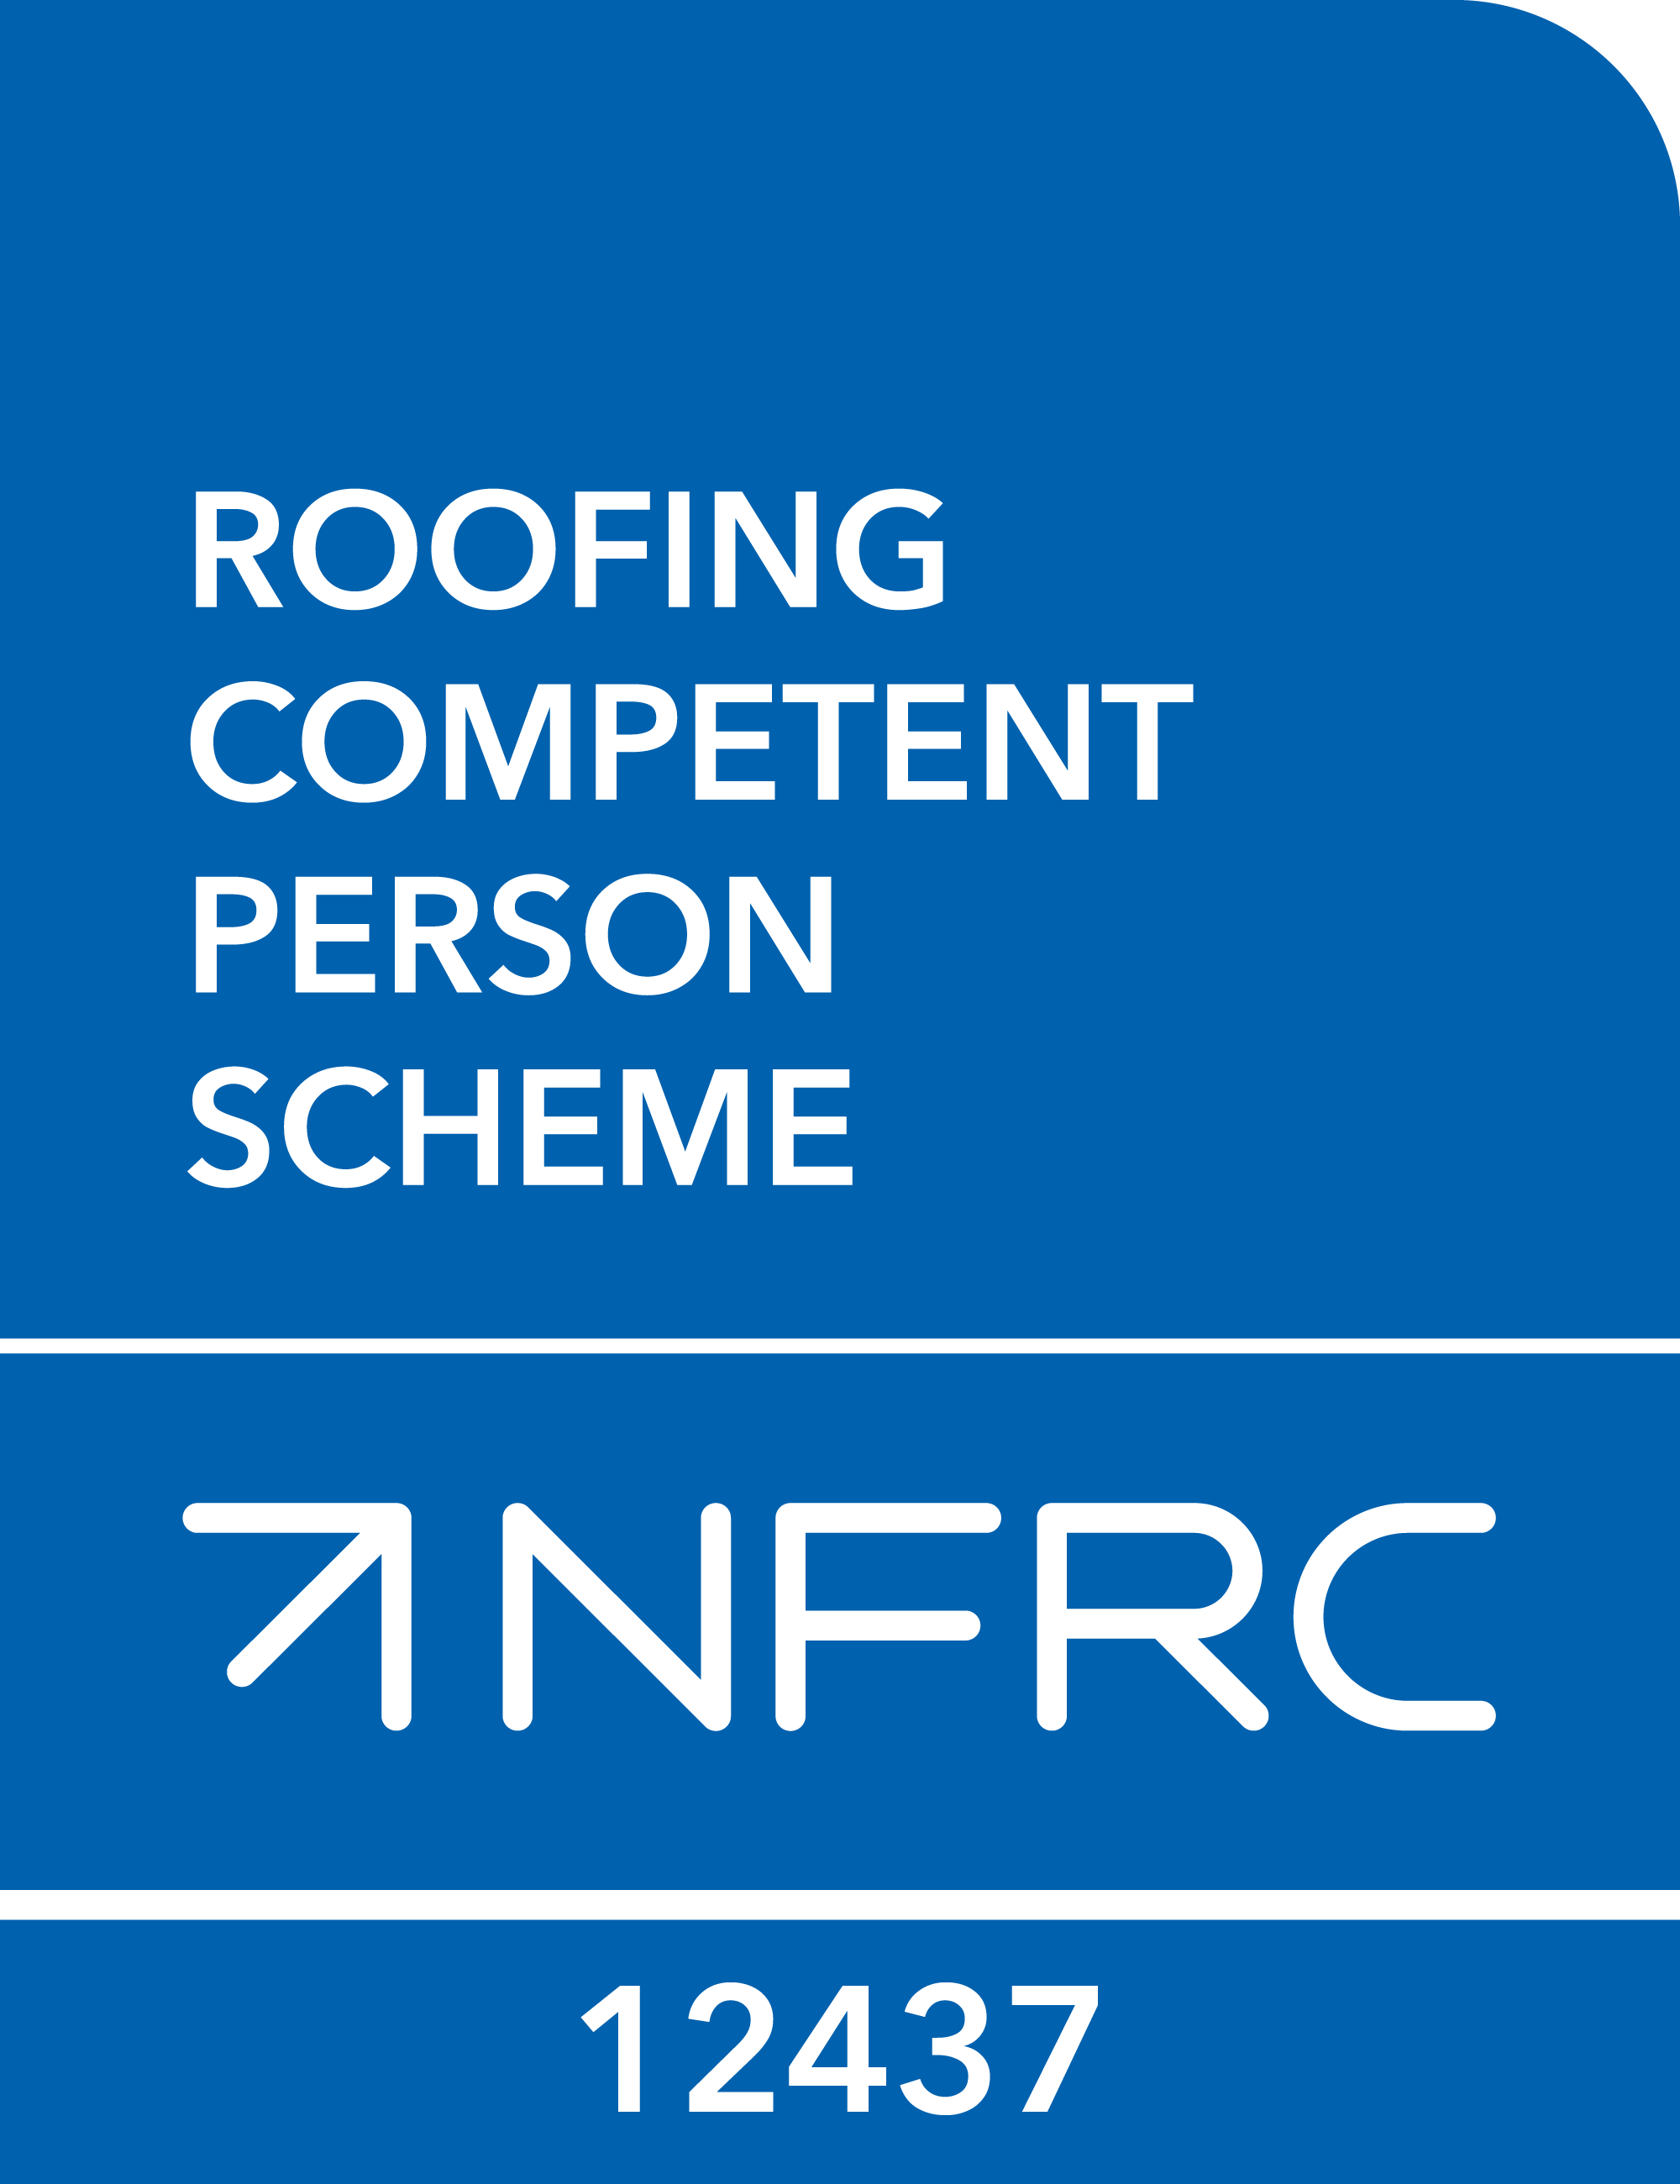 NFRC Roofing Competent Person Scheme - 12437